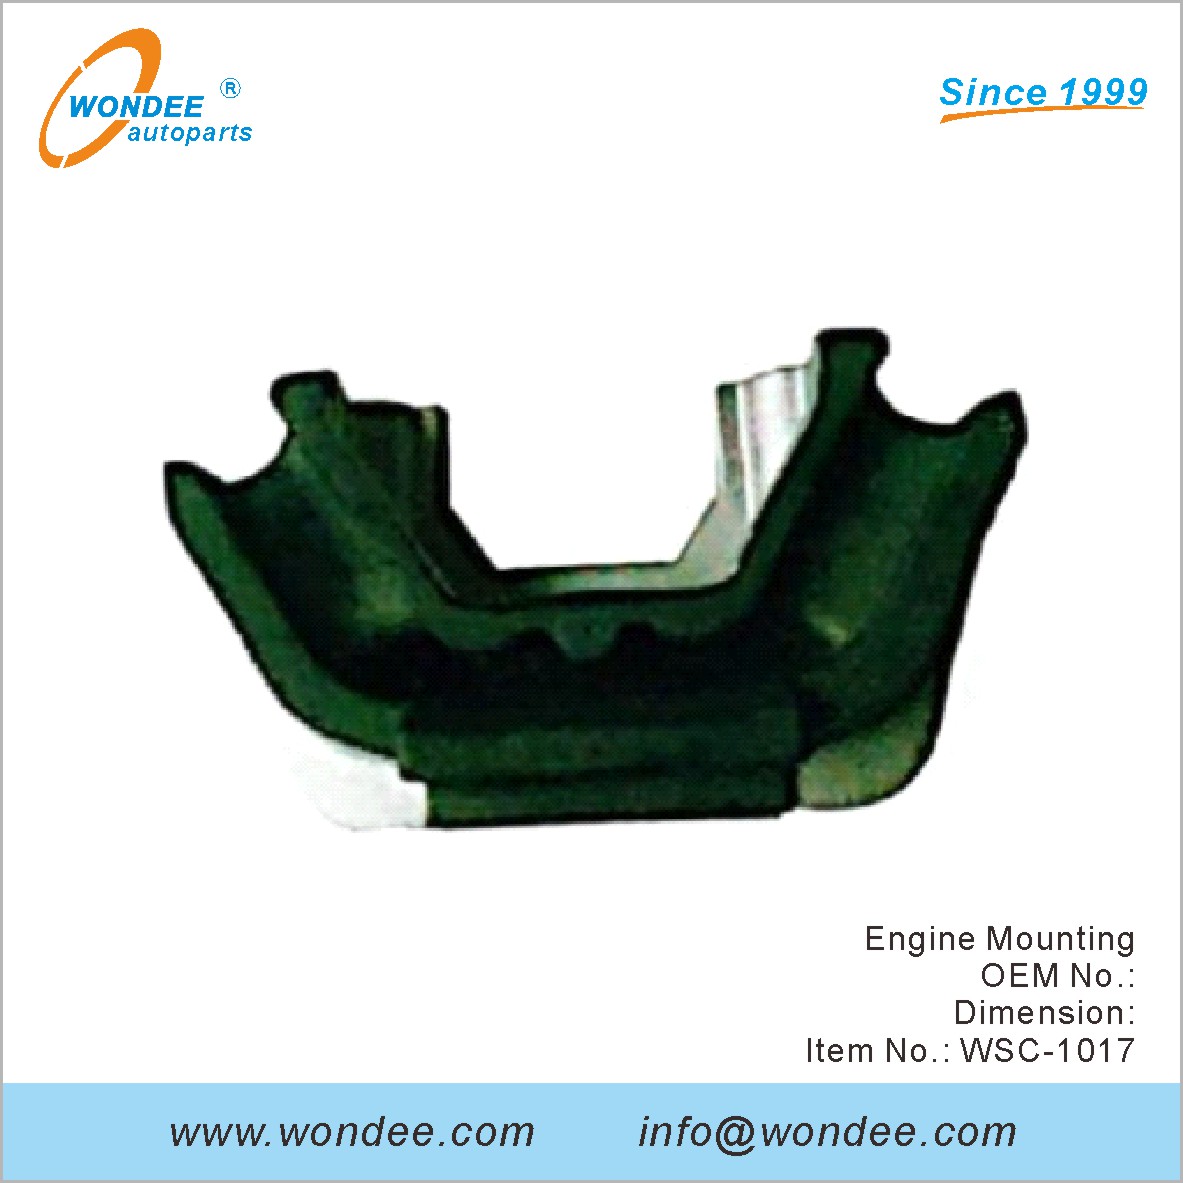 Engine Mounting OEM from WONDEE